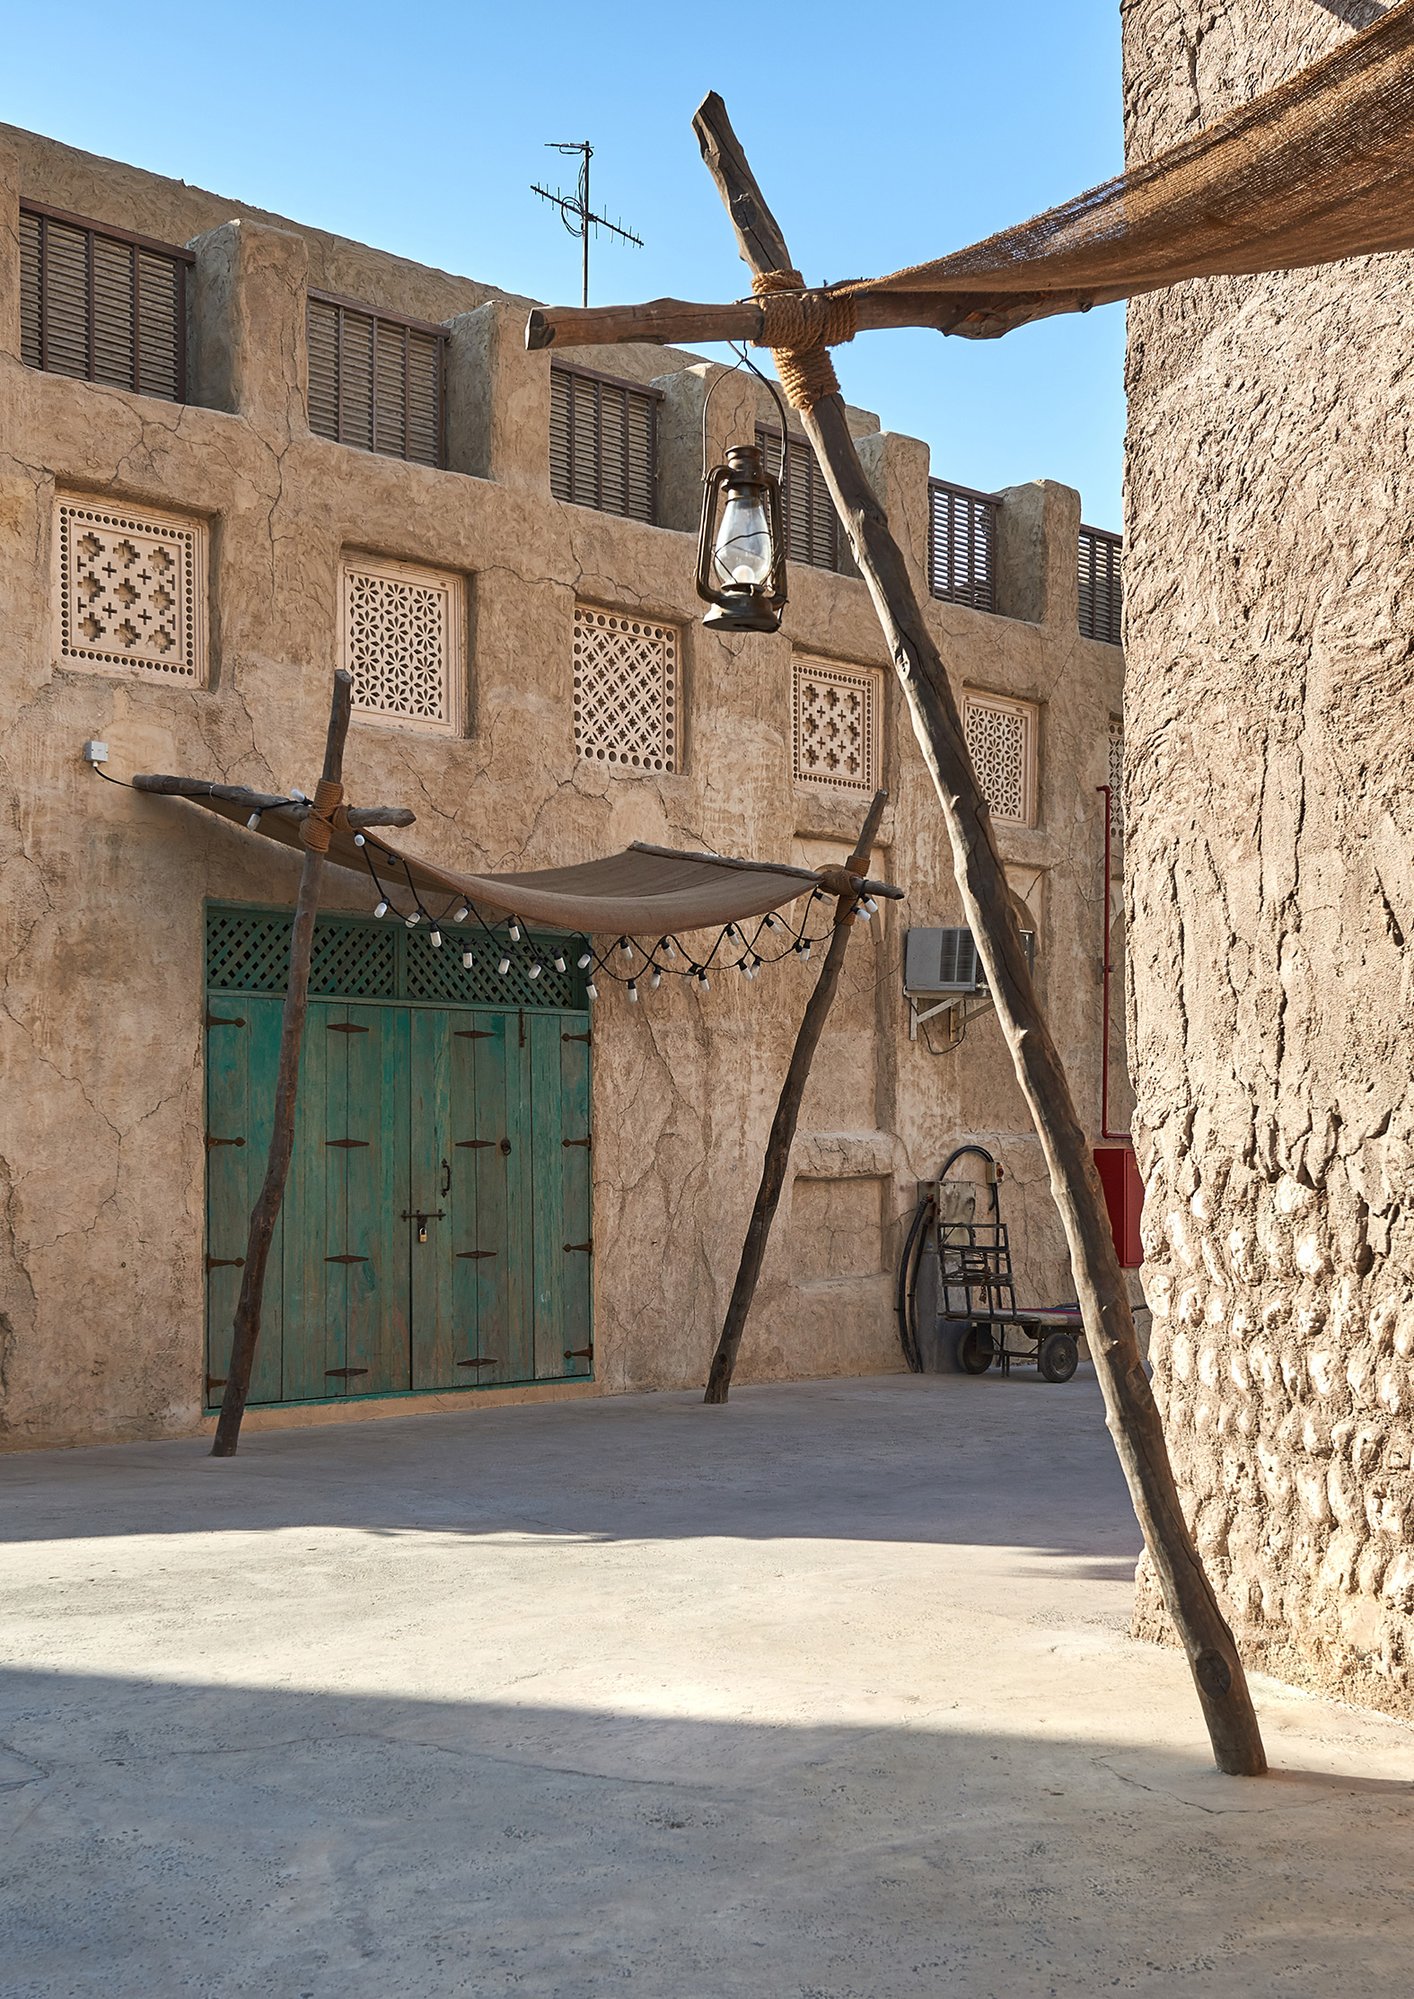 Painstaking level of detail to preserve the heritage of Al Seef